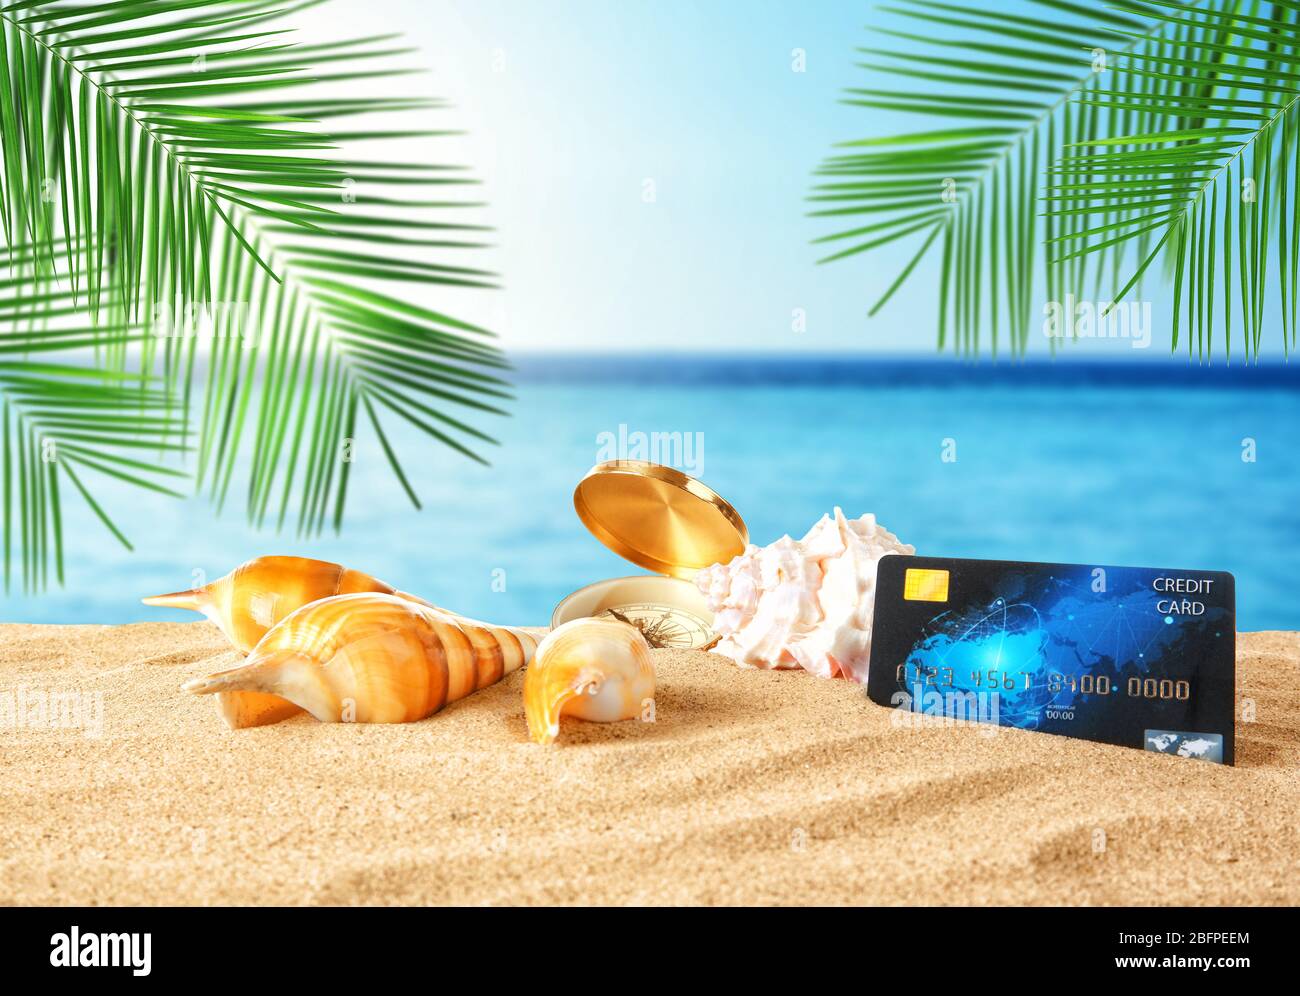 Travel concept. Credit card with seashells on landscape background Stock Photo